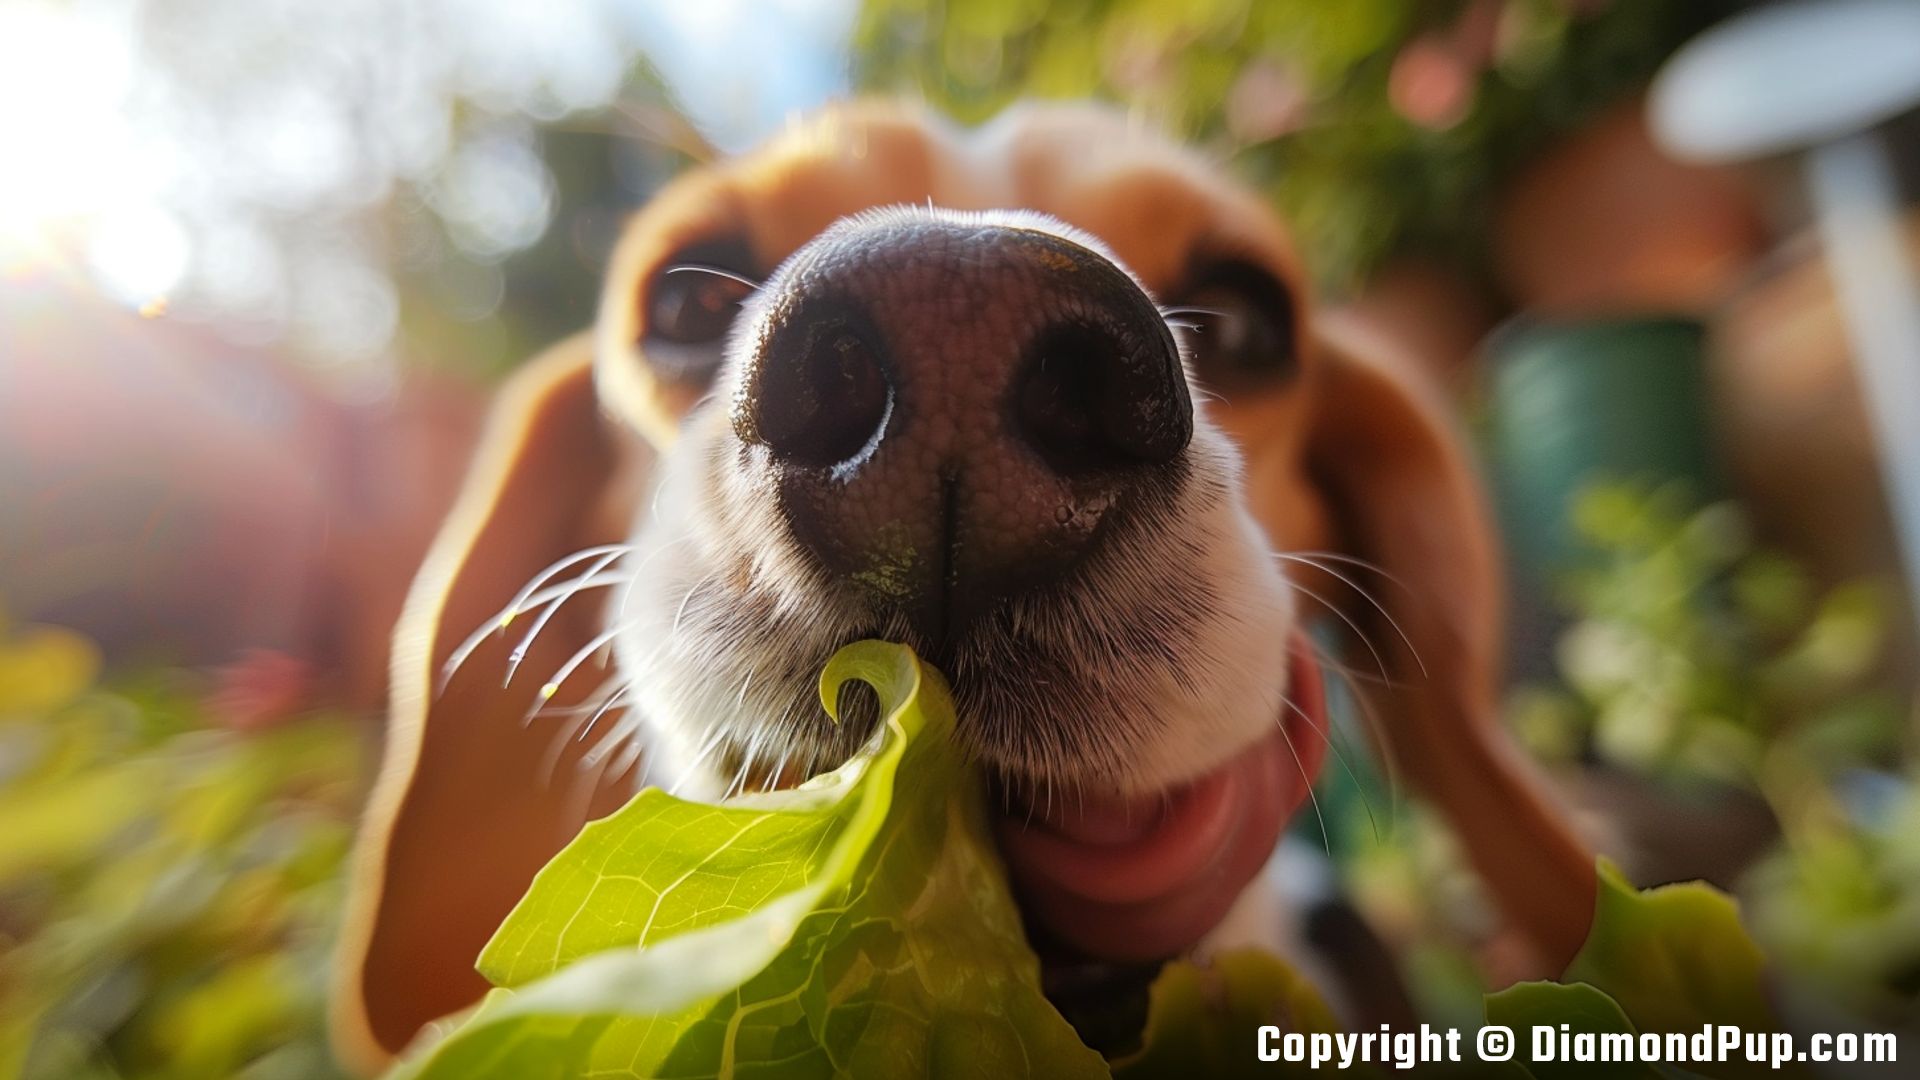 Image of a Happy Beagle Eating Lettuce